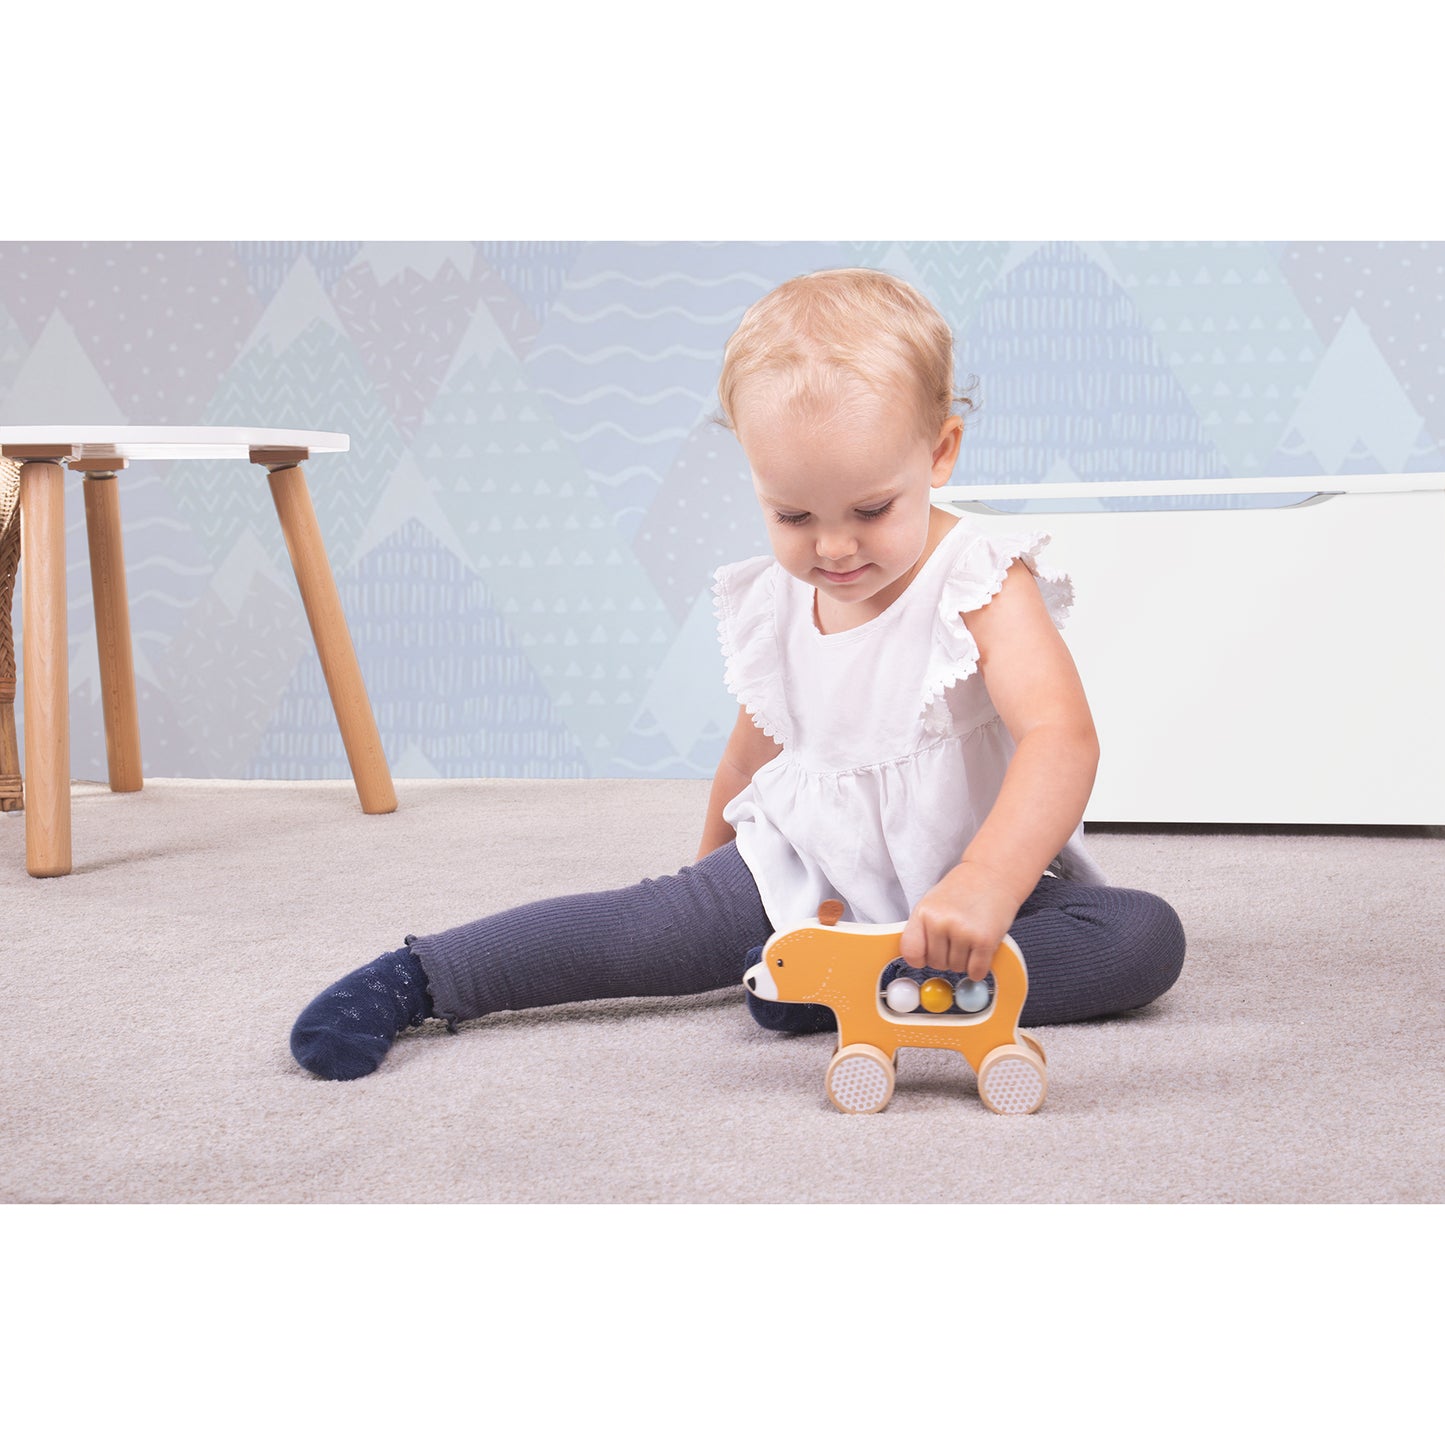 Bigjigs Toys Push Along Bear ‚Äì Safe and Engaging Wooden Toy for Infants